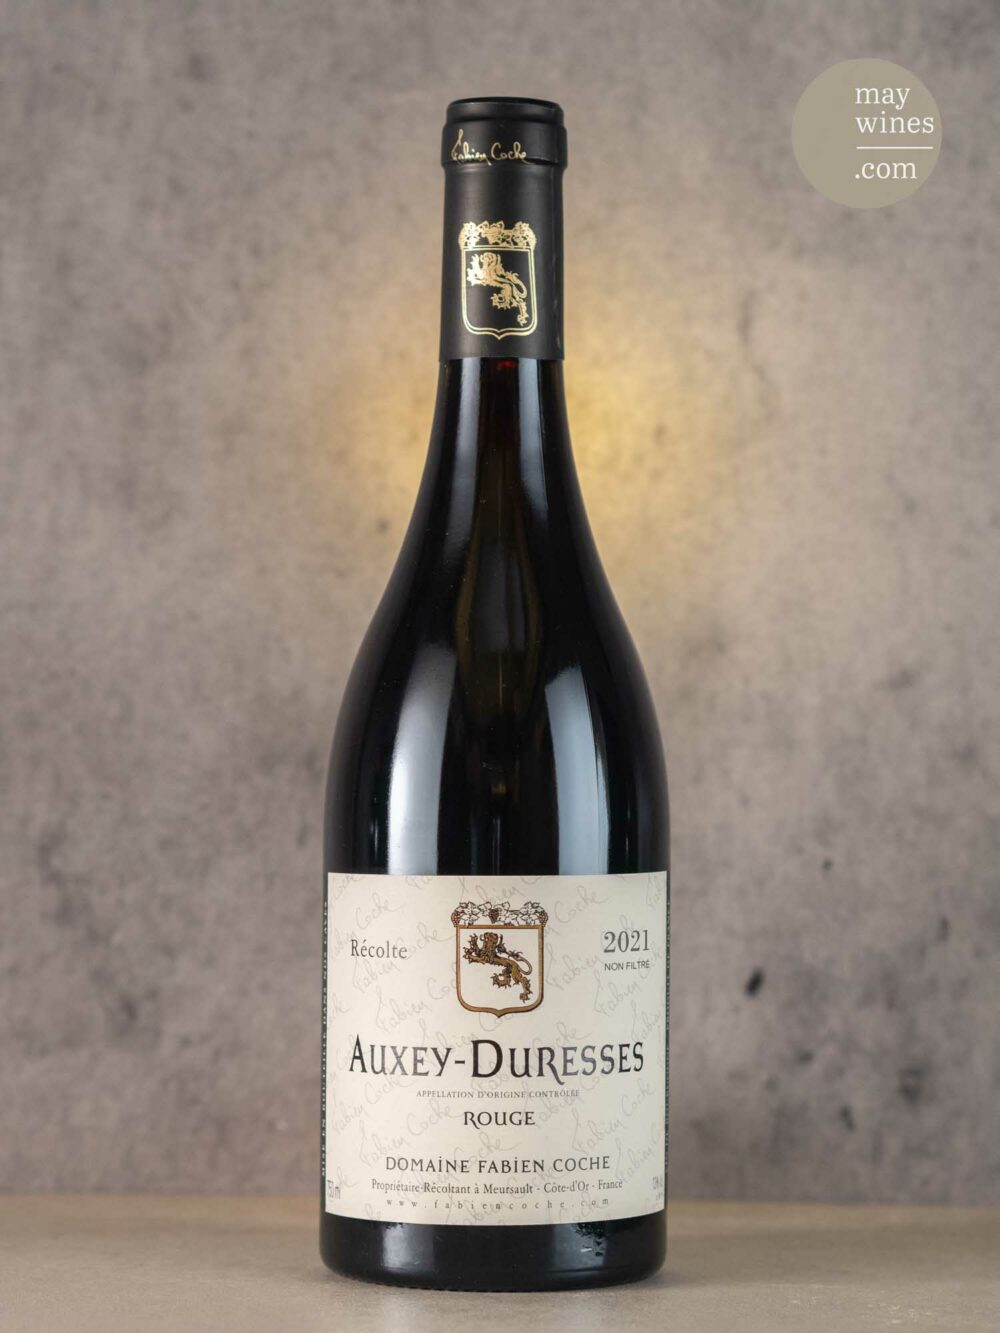 May Wines – Rotwein – 2021 Auxey-Duresses Rouge AC - Domaine Fabien Coche